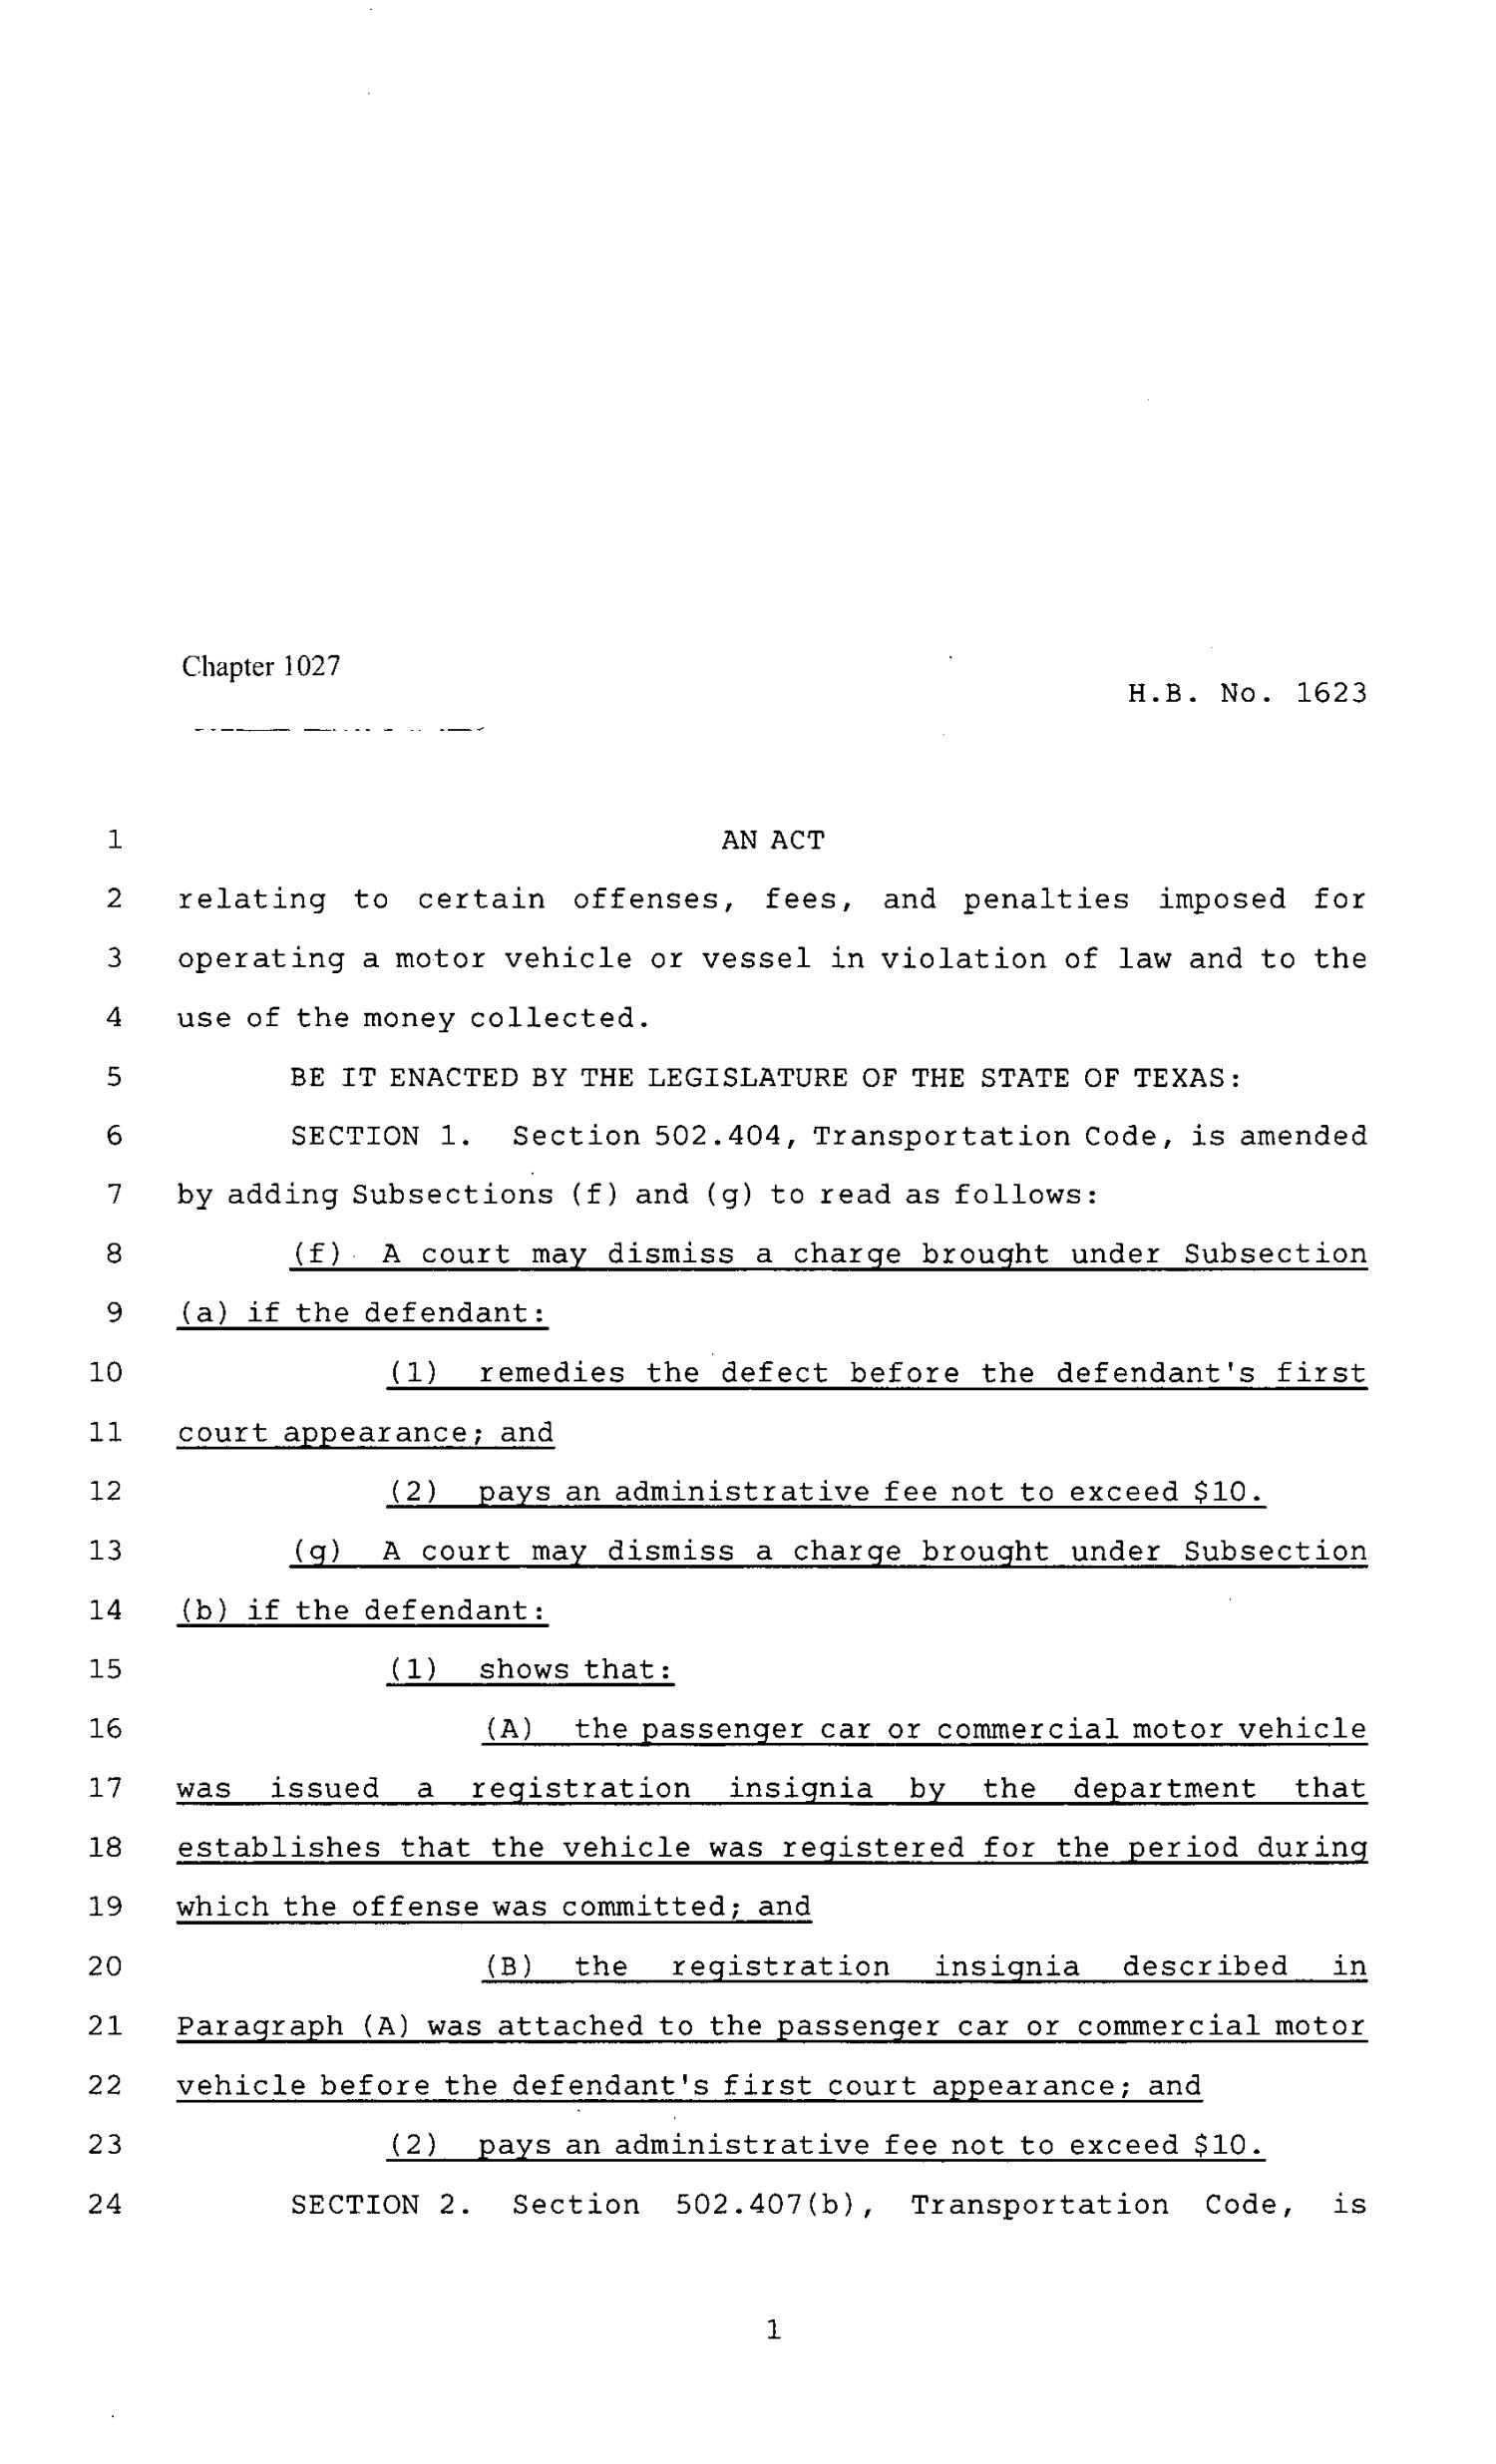 80th Texas Legislature, Regular Session, House Bill 1623, Chapter 1027
                                                
                                                    [Sequence #]: 1 of 14
                                                